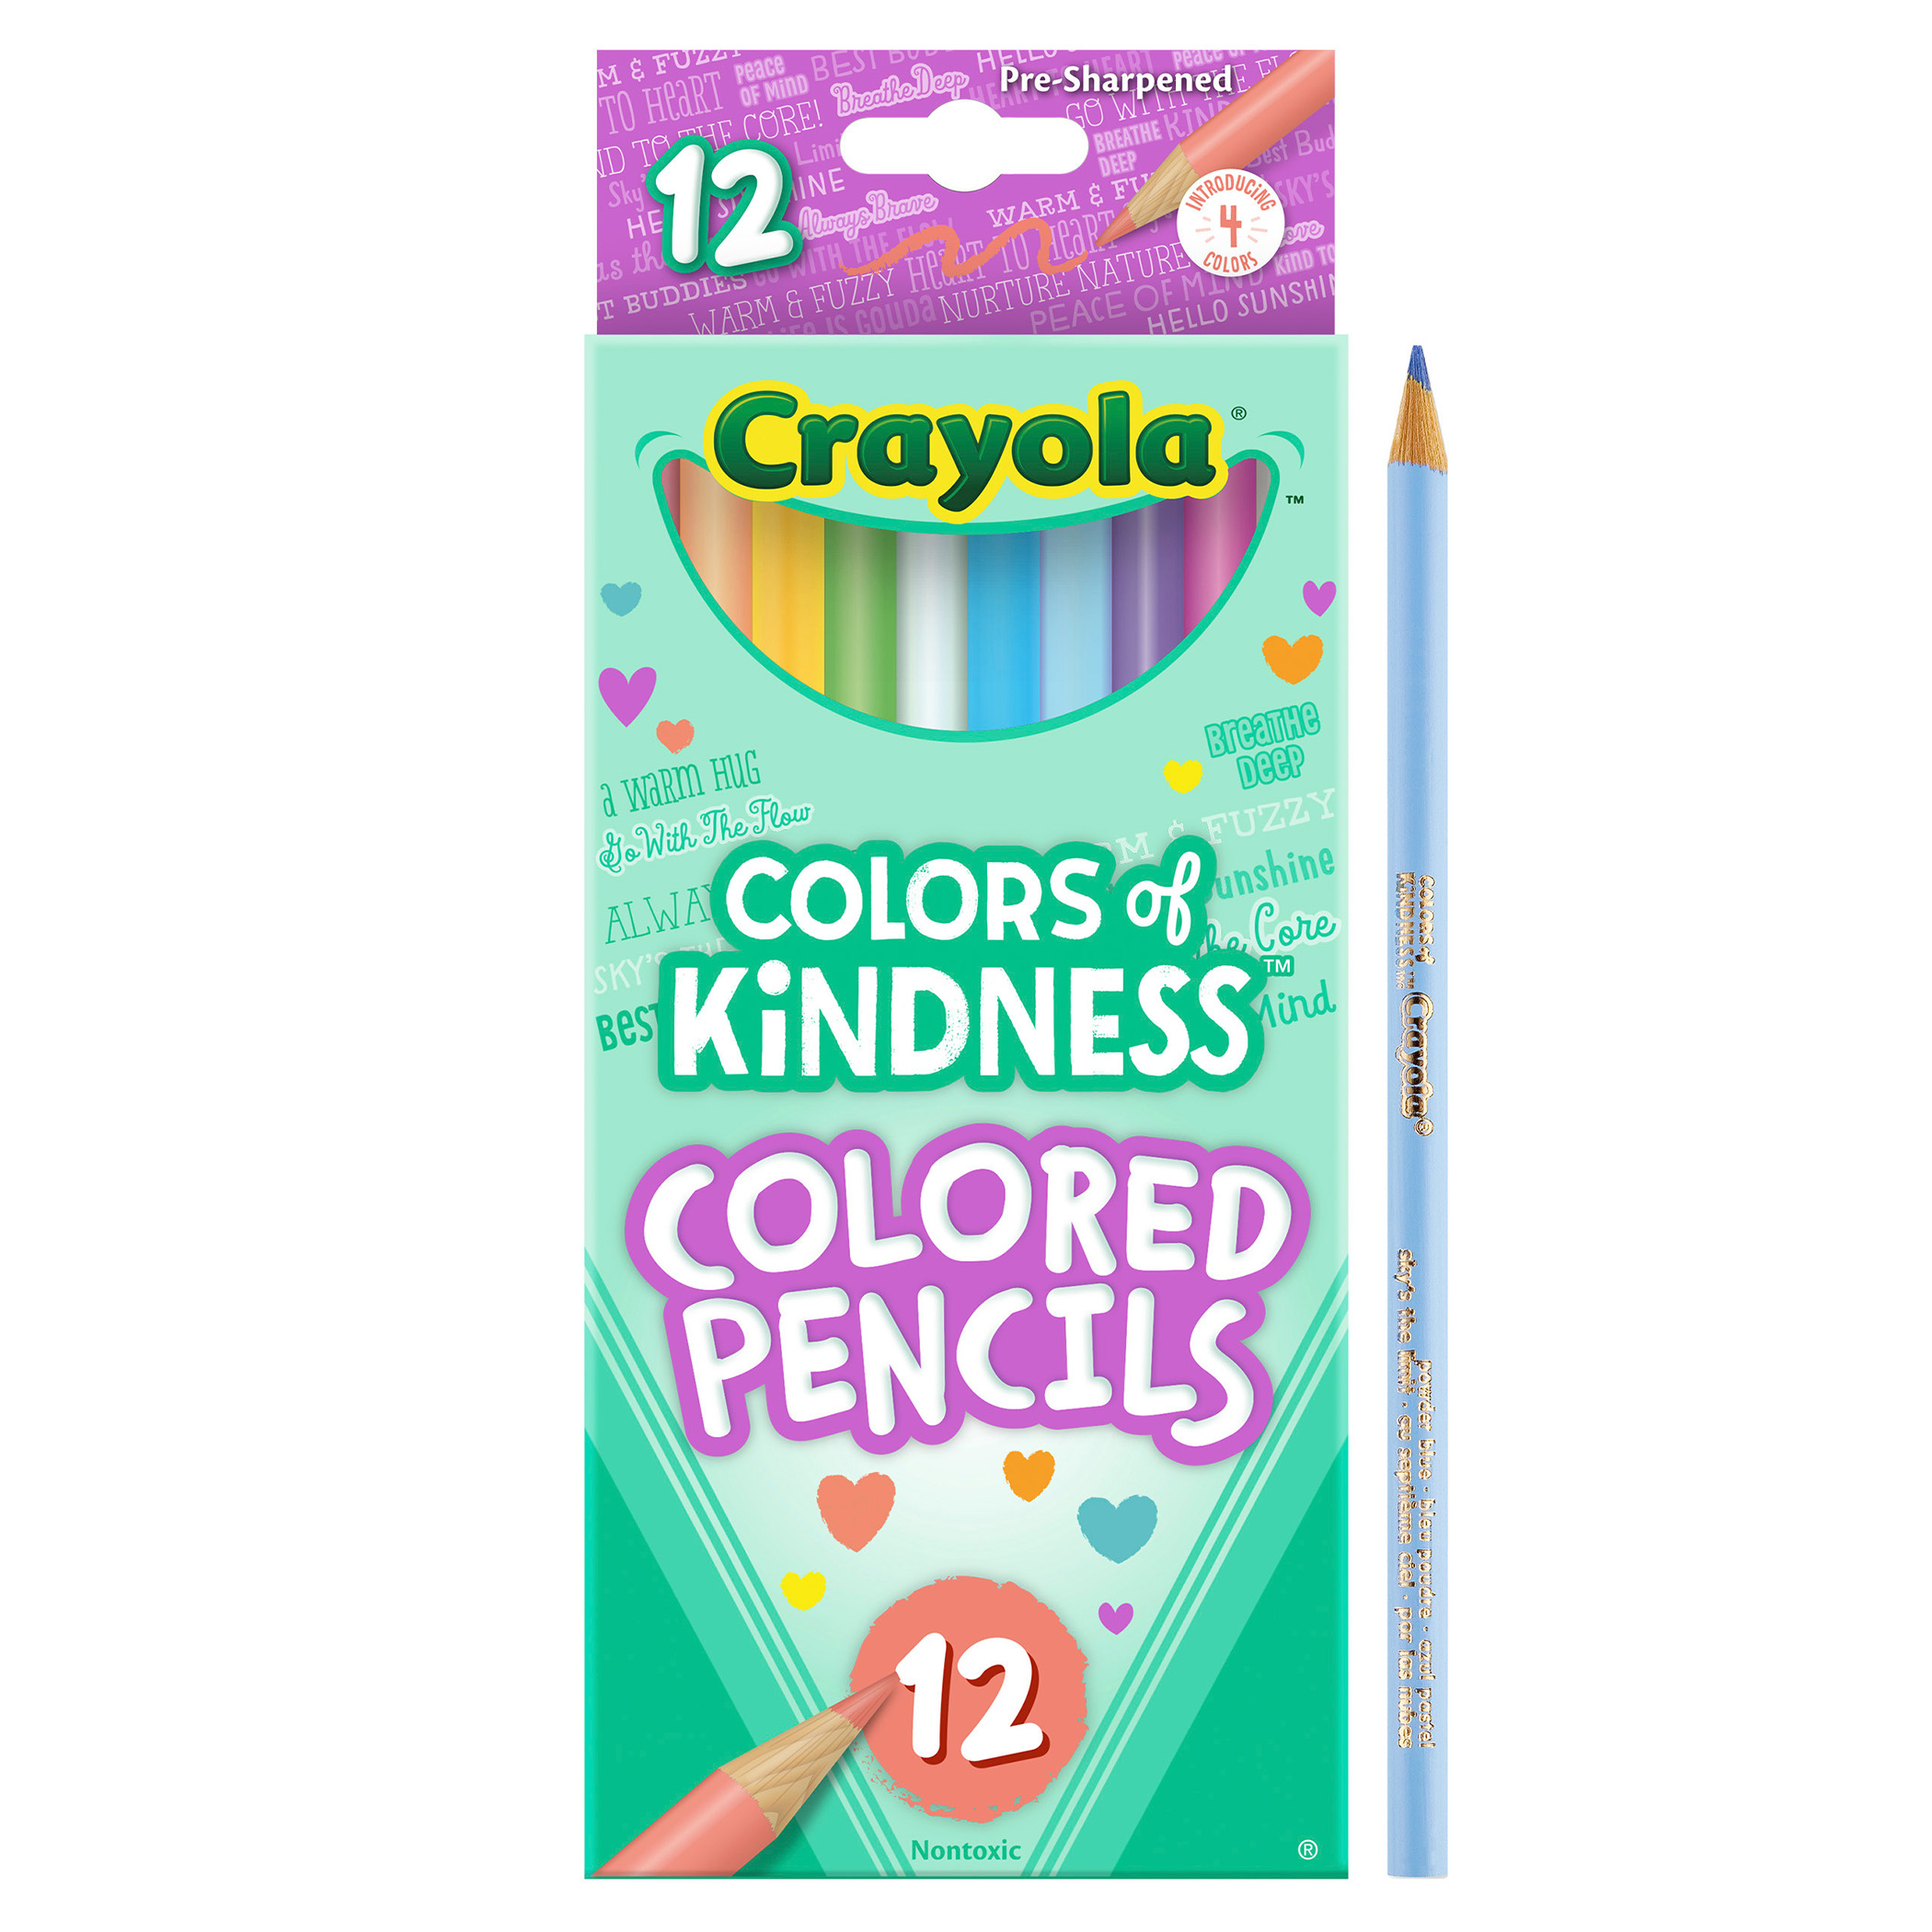  Crayola Mini Colored Pencils (Colors may vary), Coloring  Supplies for Kids, 64 Count, Gift : Toys & Games